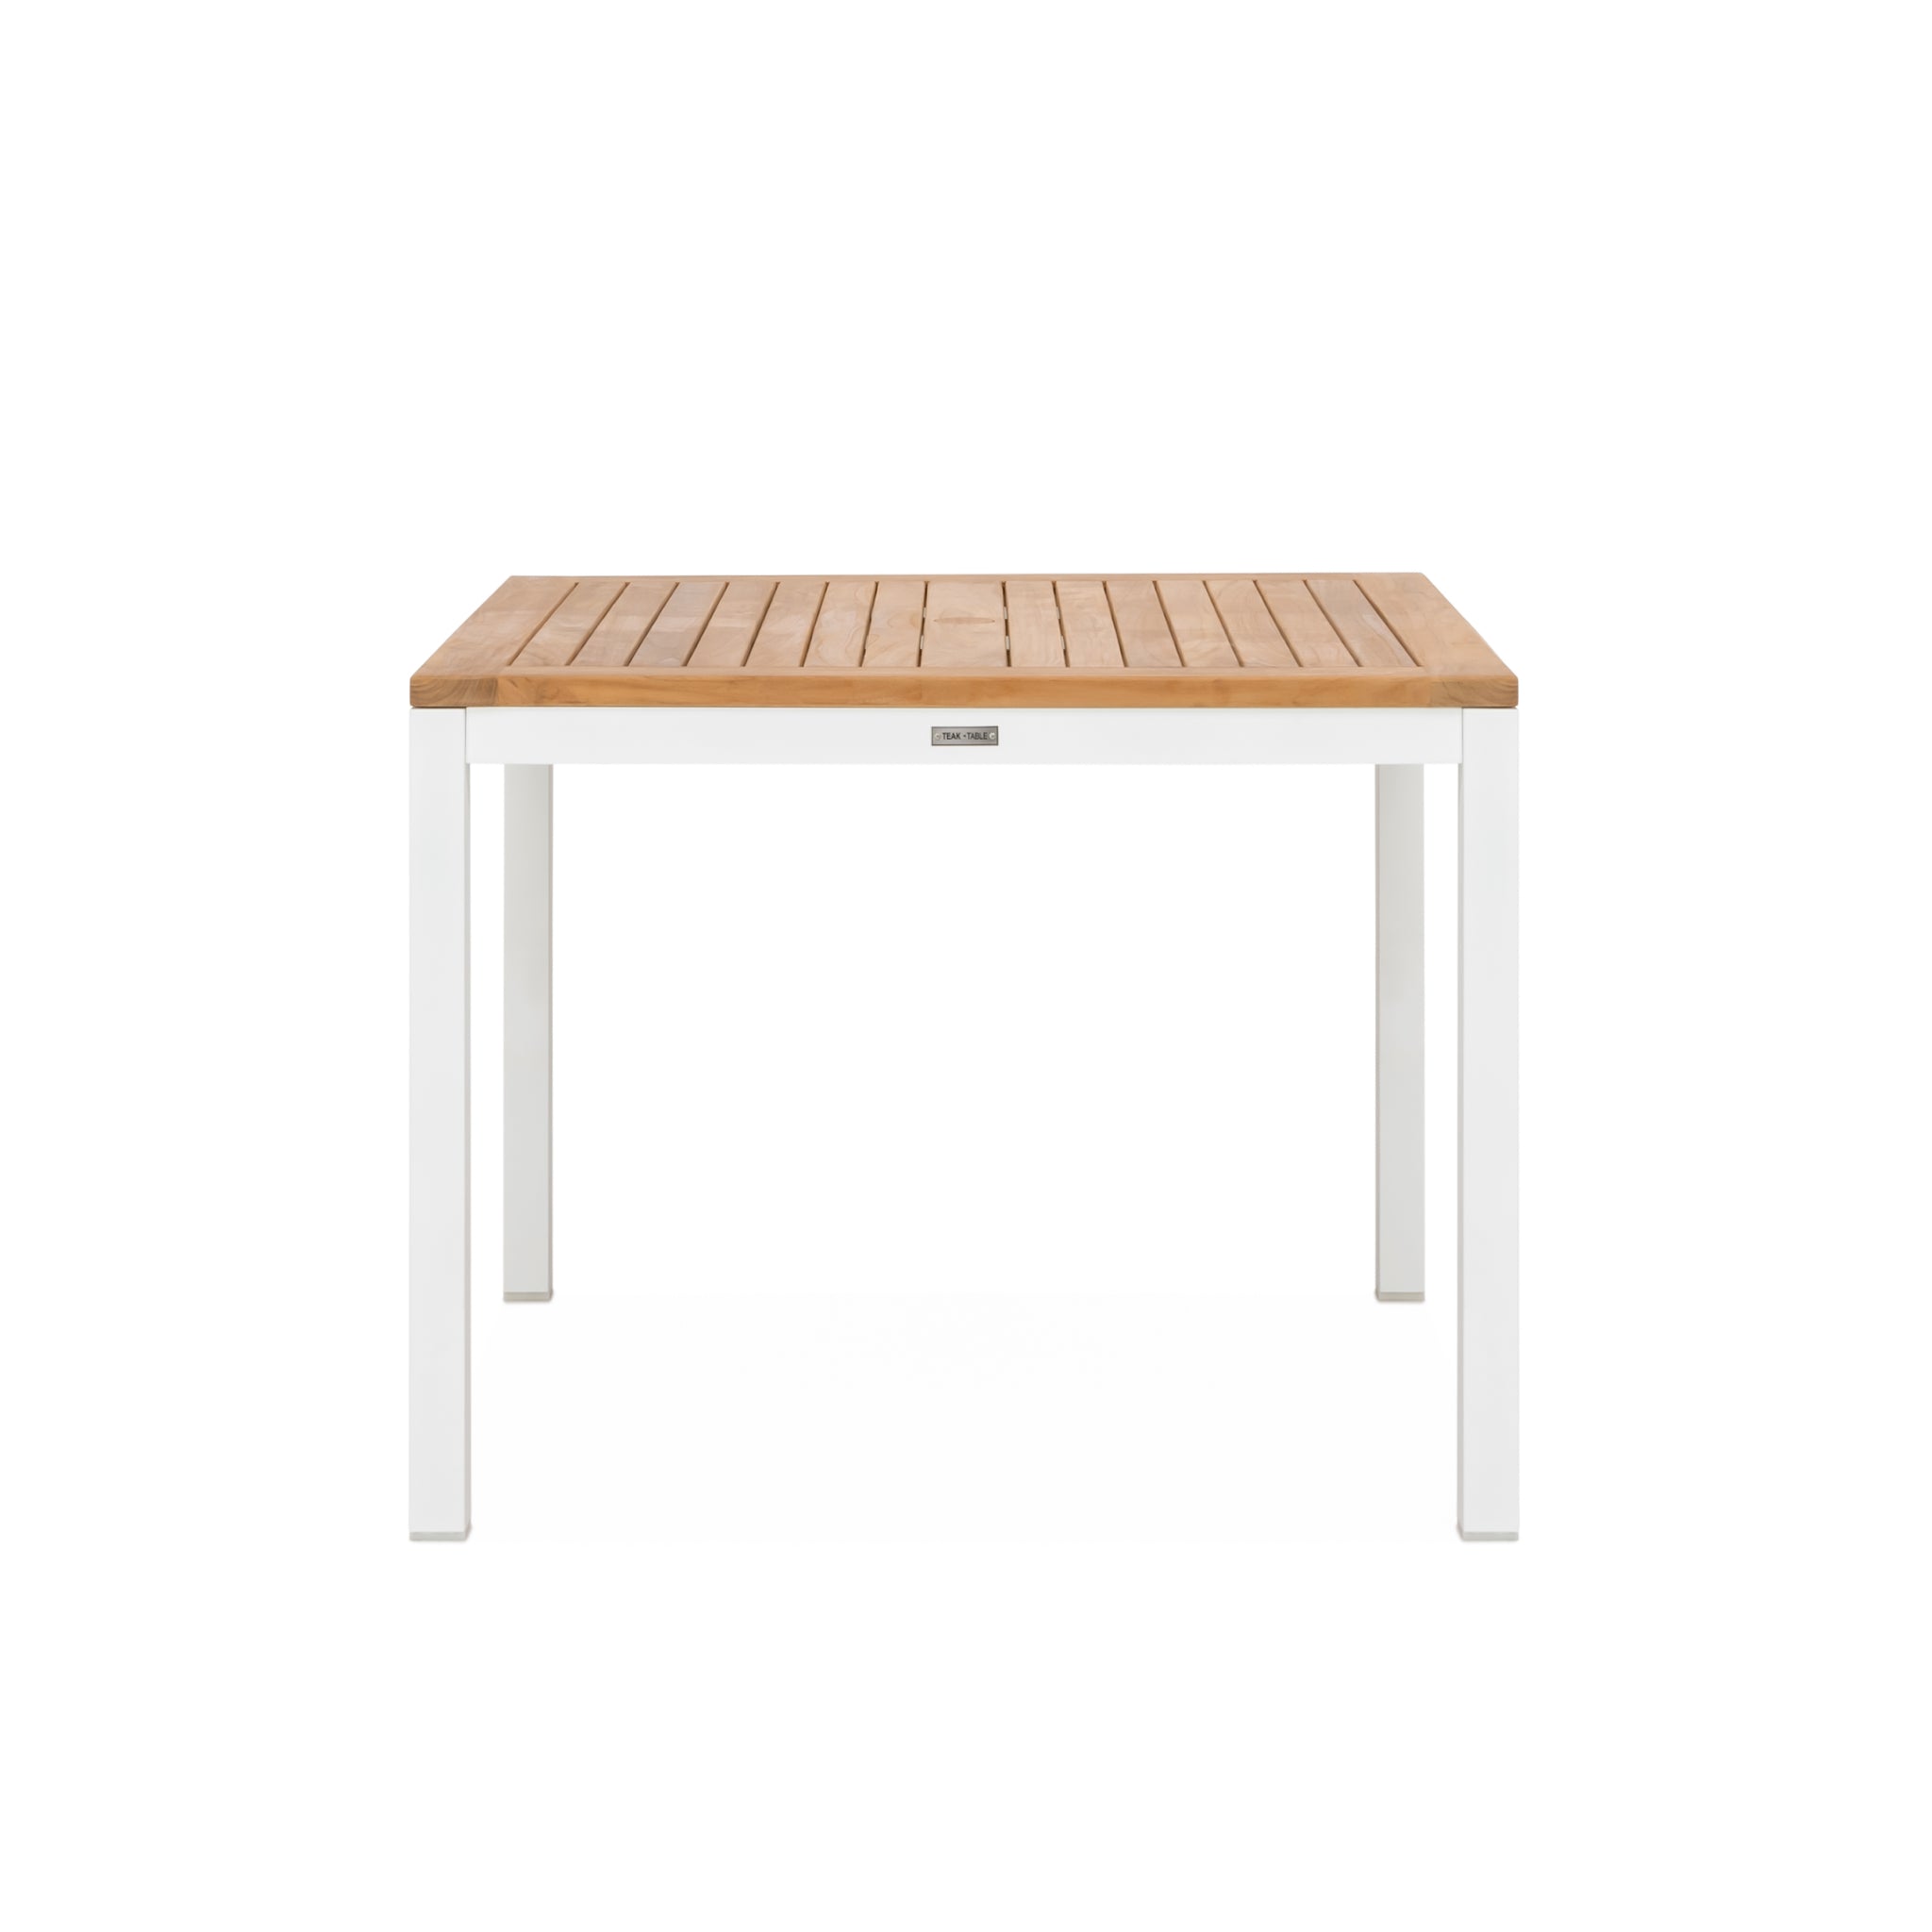 Indica tempo Smeren St. Barts 40" Square Table – Teak + Table Outdoor